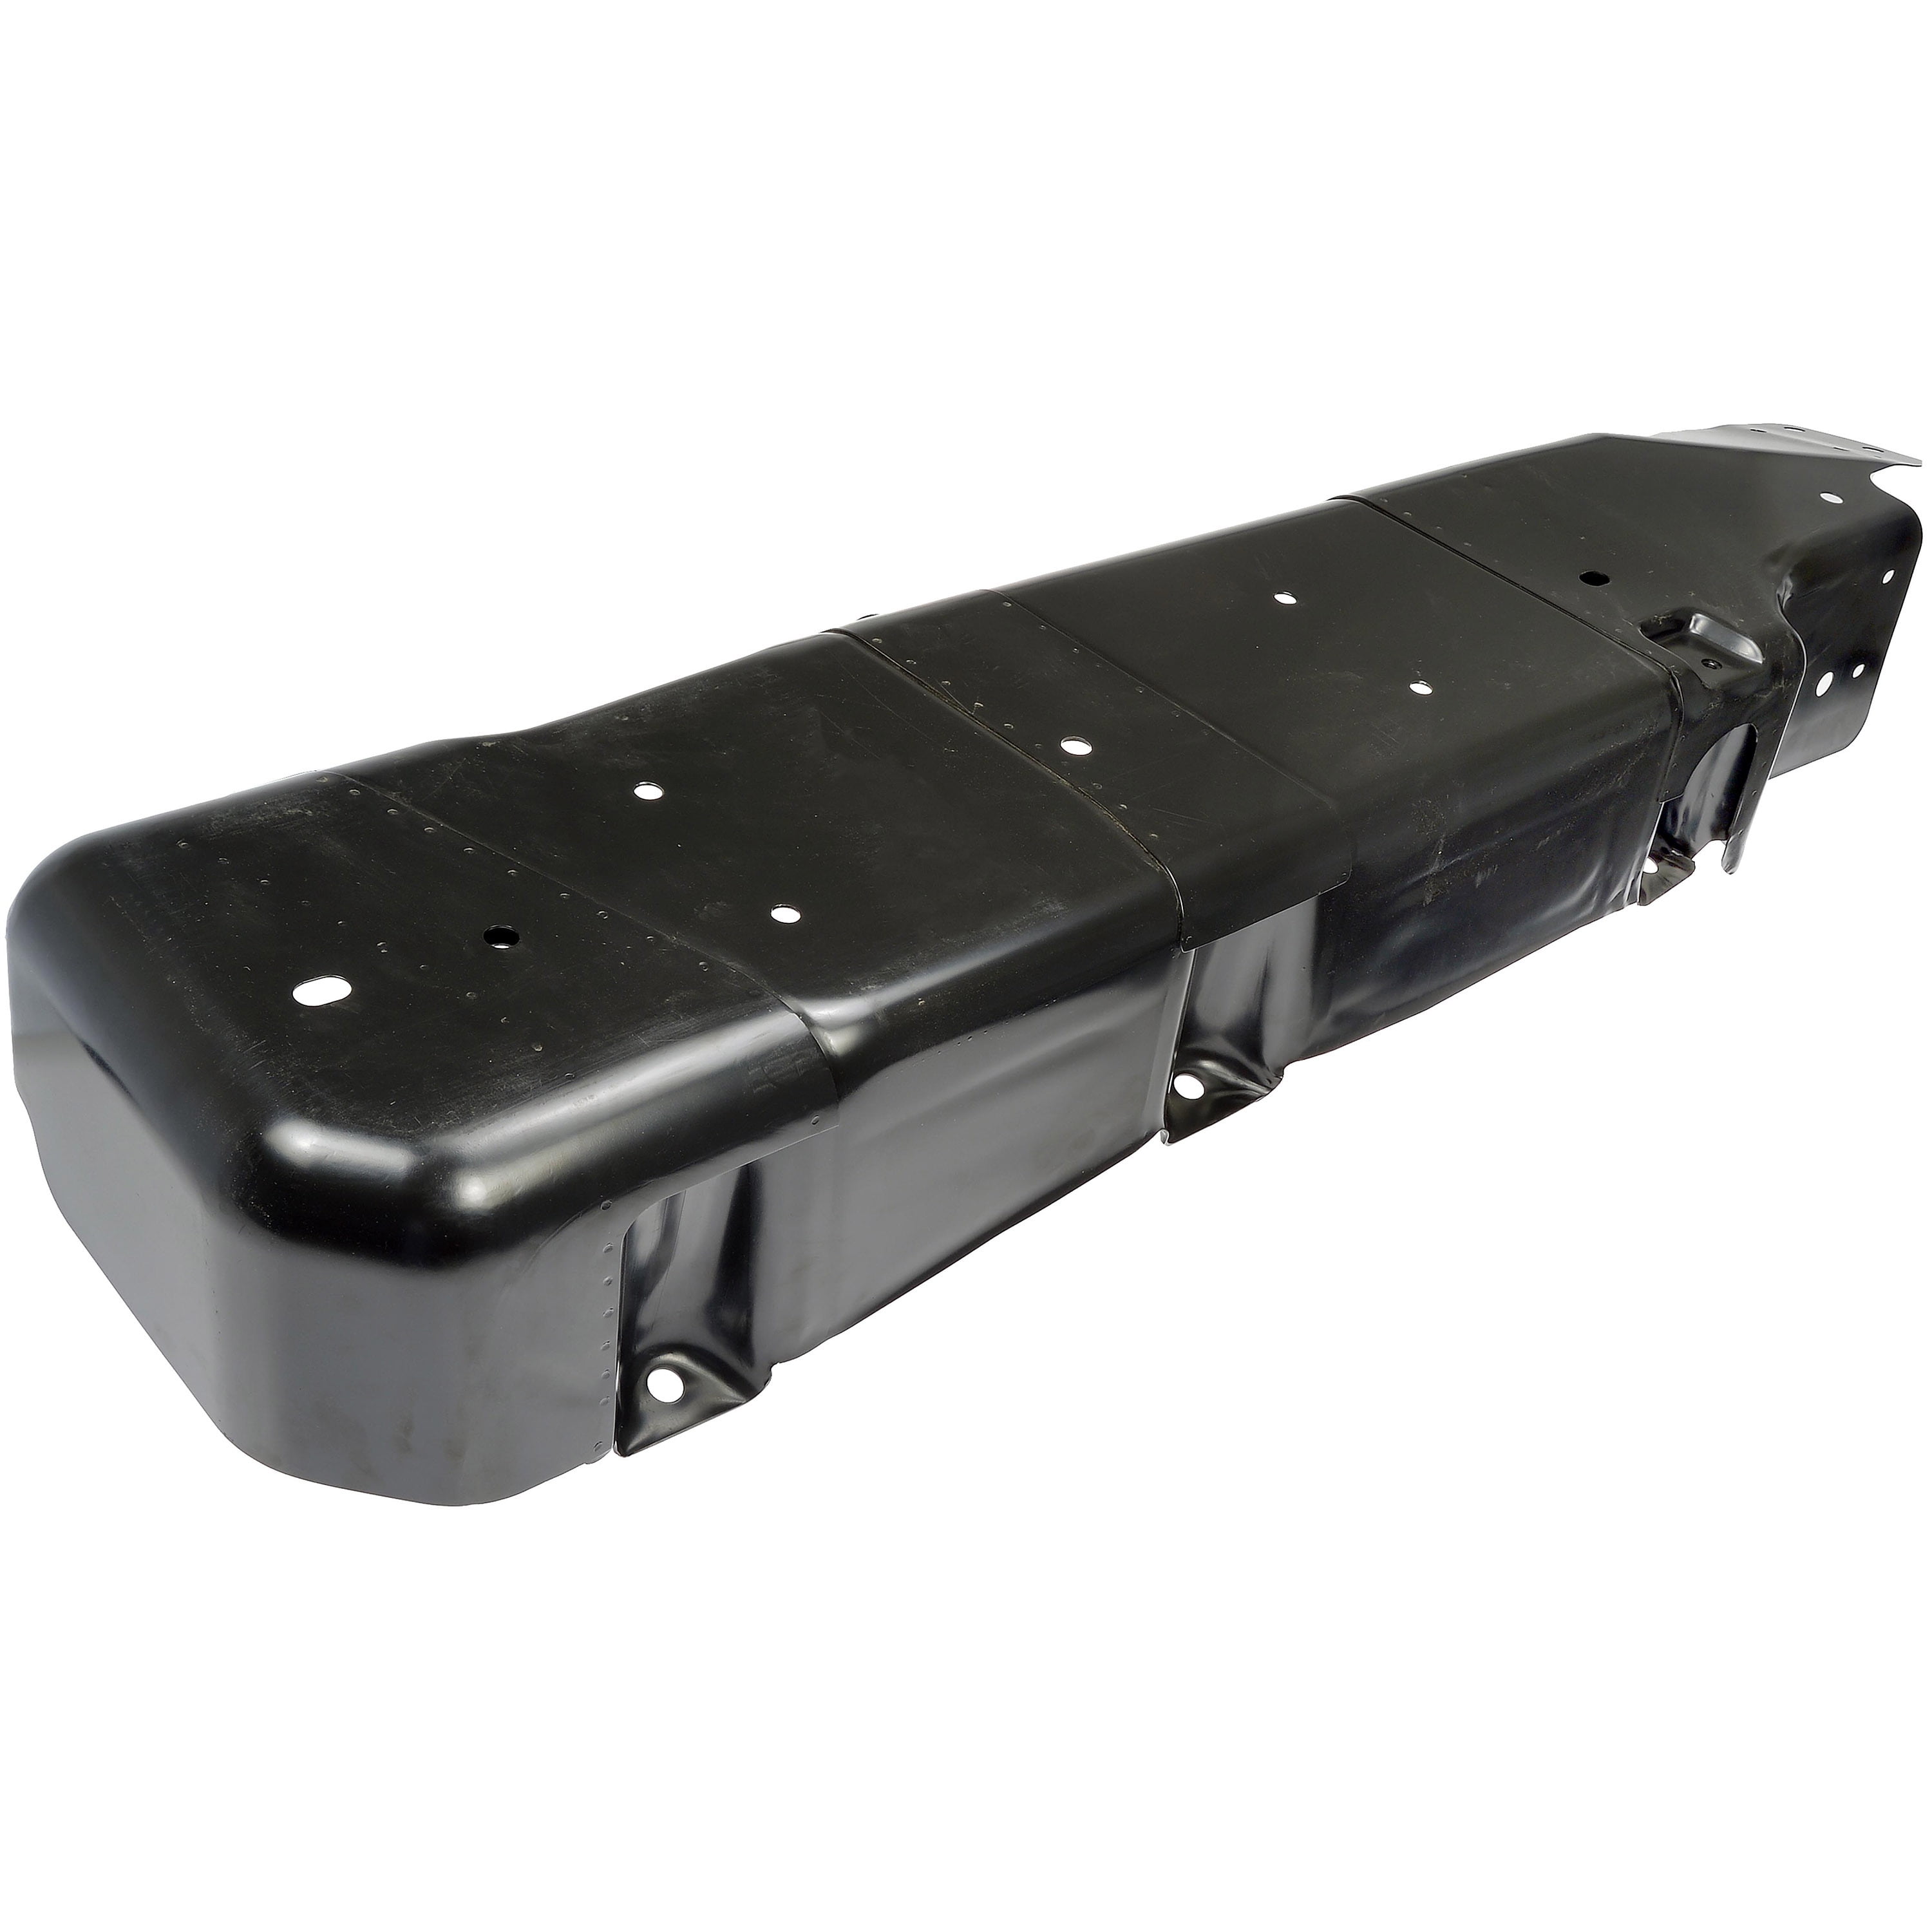 Dorman 999-900 Fuel Tank Skid Plate Guard for Specific Jeep Models -  